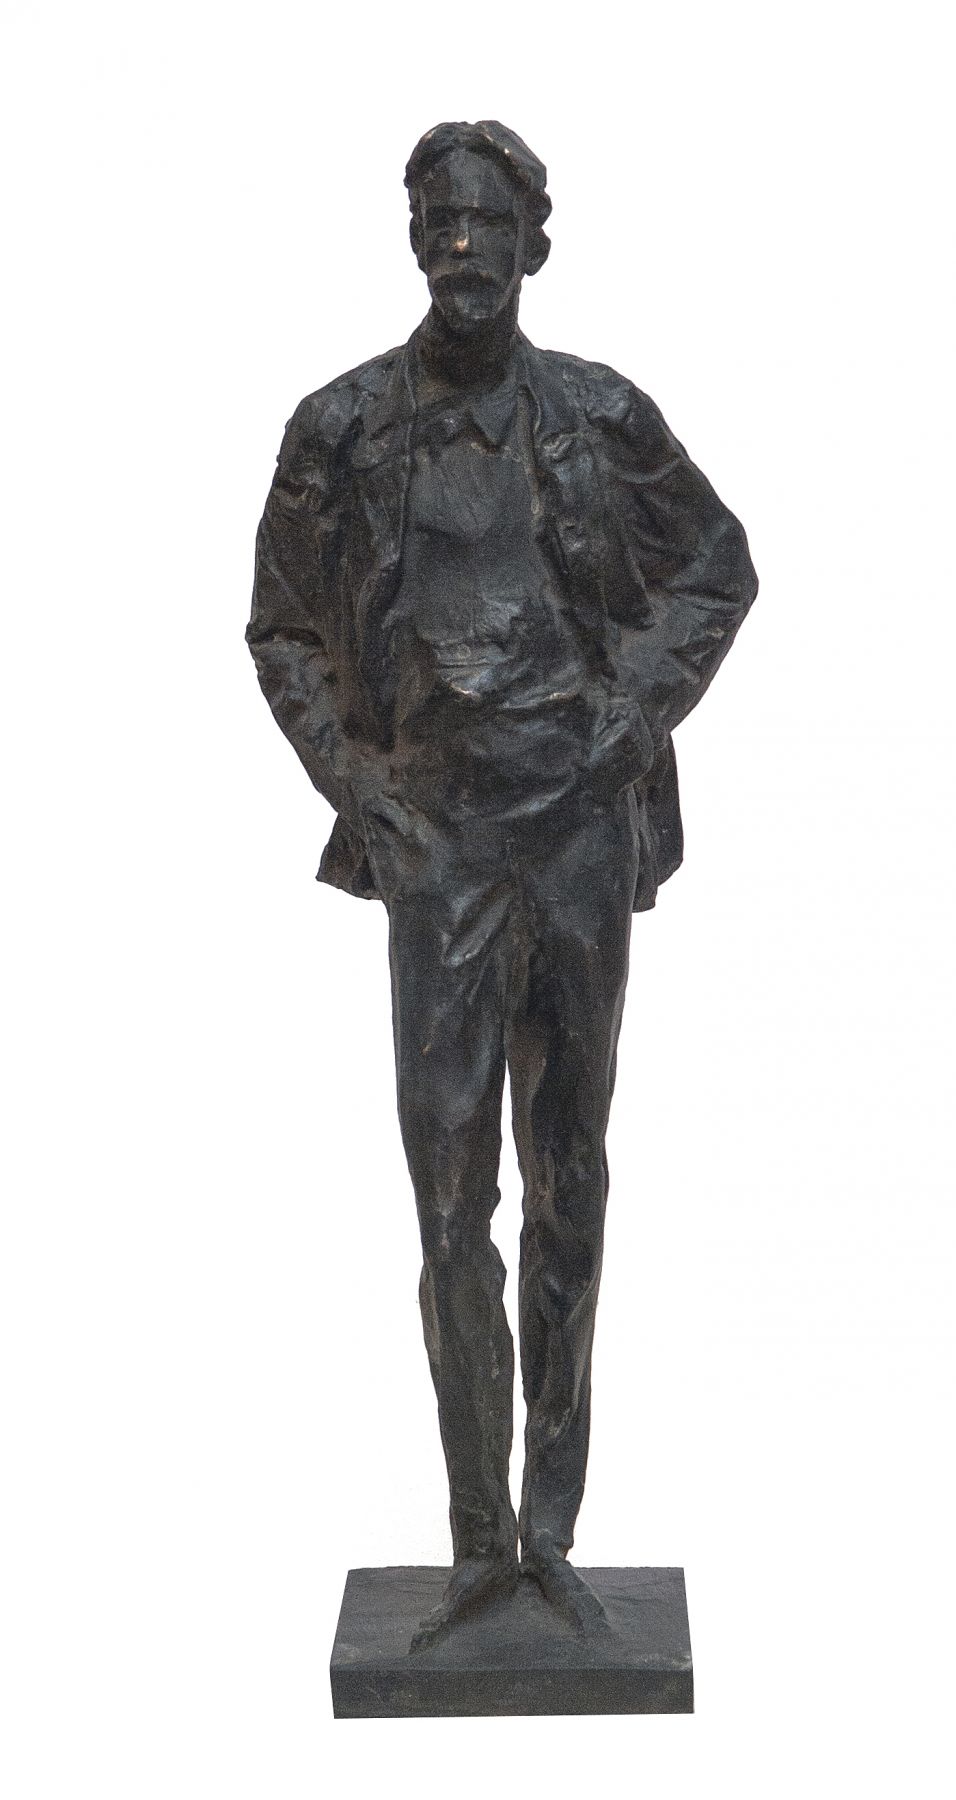  A.P. Chekhov A figure for the project of a monument for Moscow.